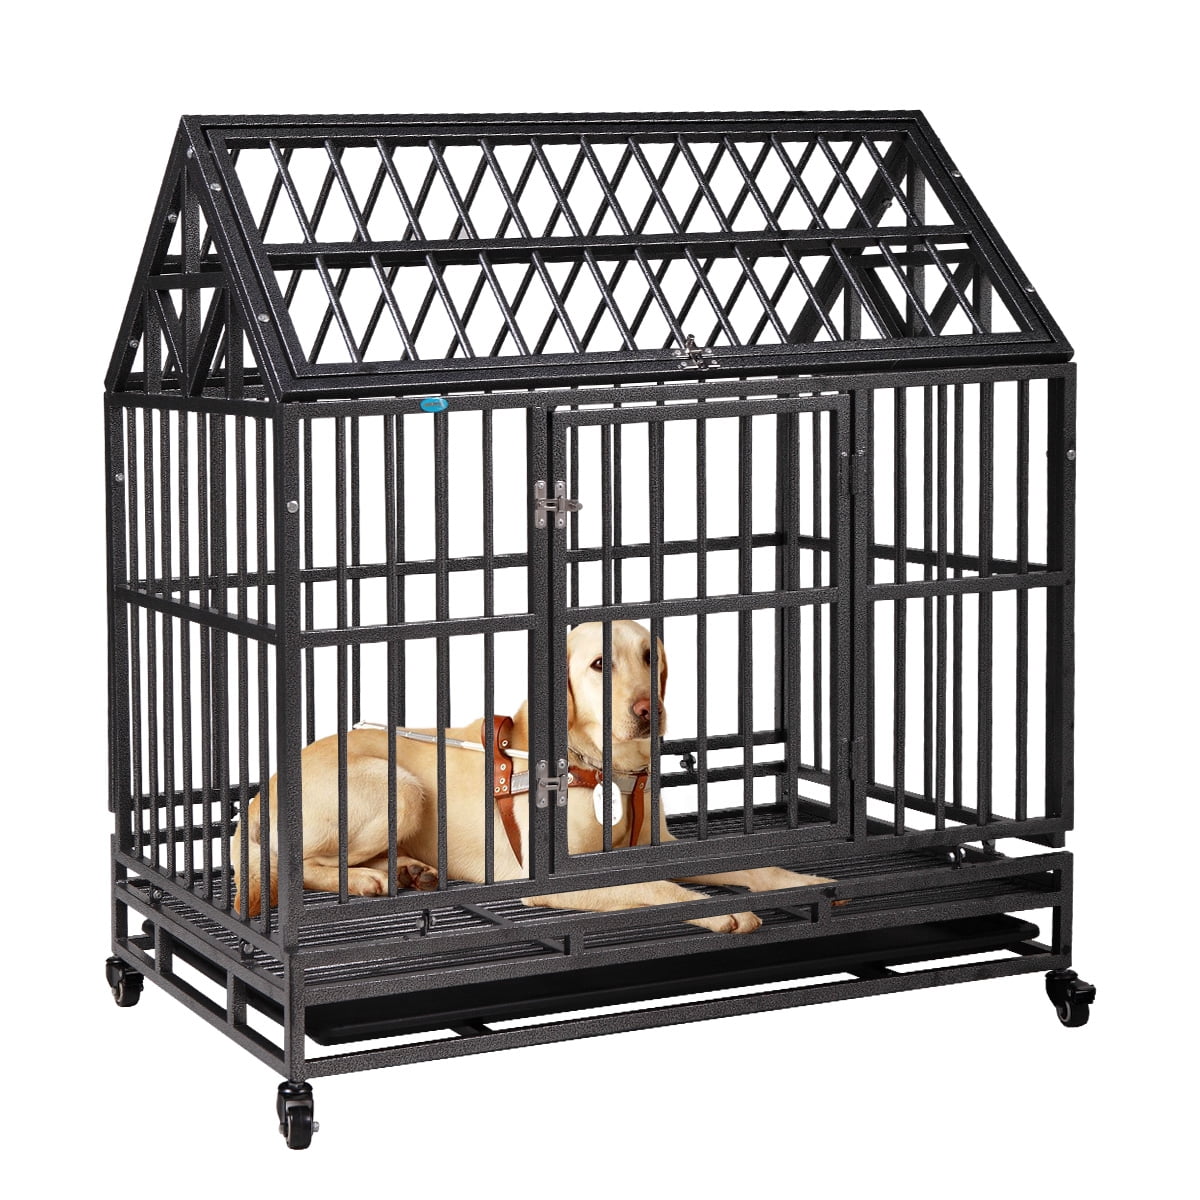 DodreHome Heavy Duty Dog Cage Crate for Large Dogs,Strong Metal Kennel with Four Wheels and One Tray,37-Inch Black Color 